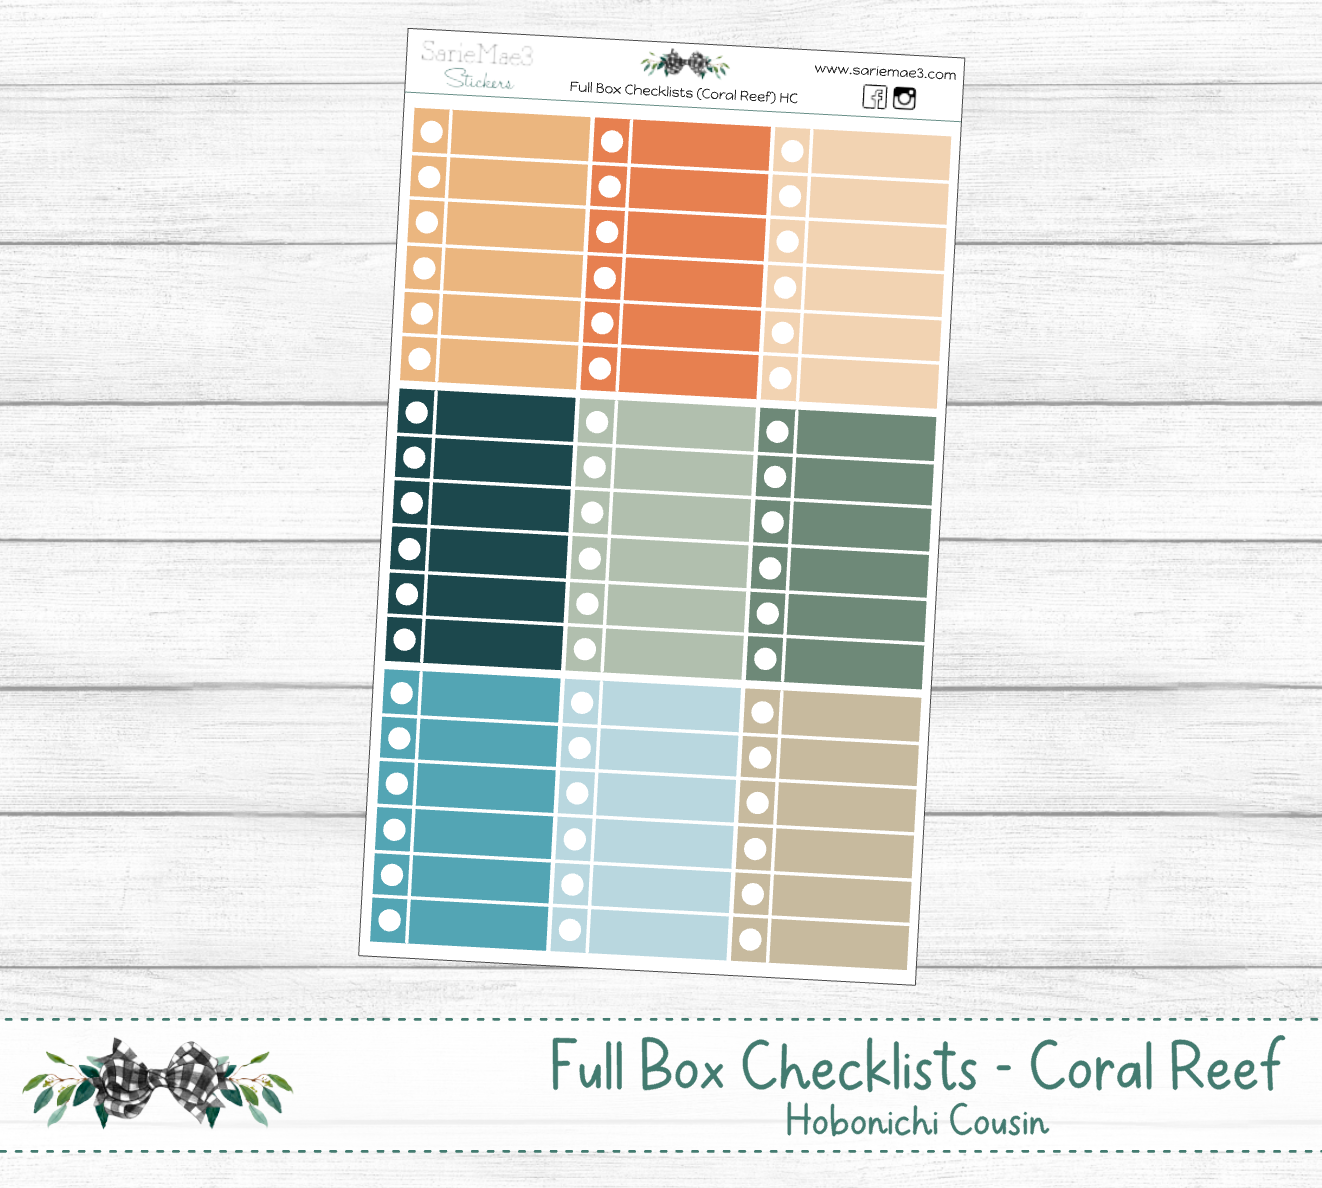 Full Box Checklists (Coral Reef) Hobo Cousin